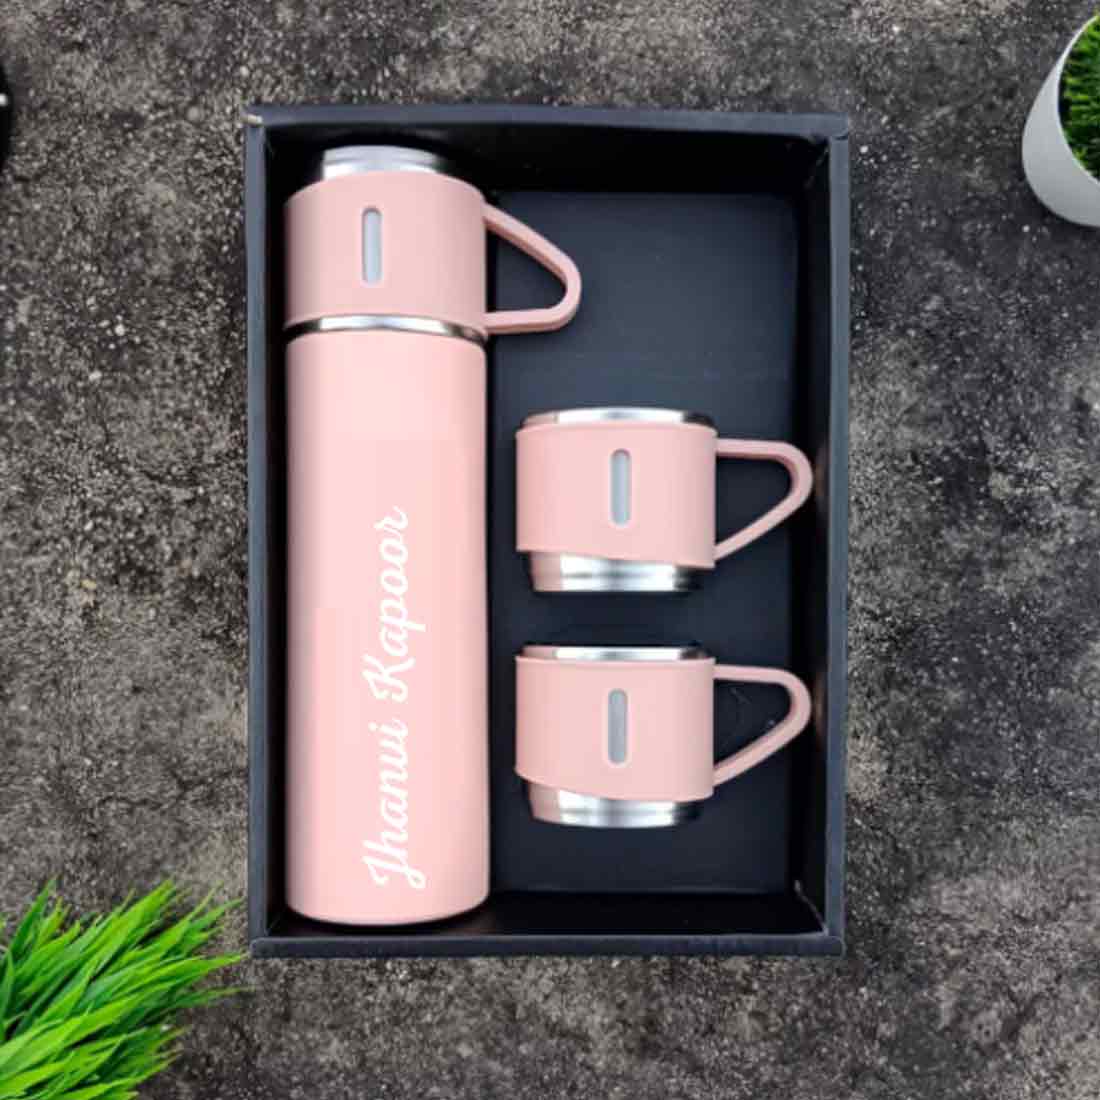 Buy Customized Thermos Coffee Cup Flask Online India – Nutcase